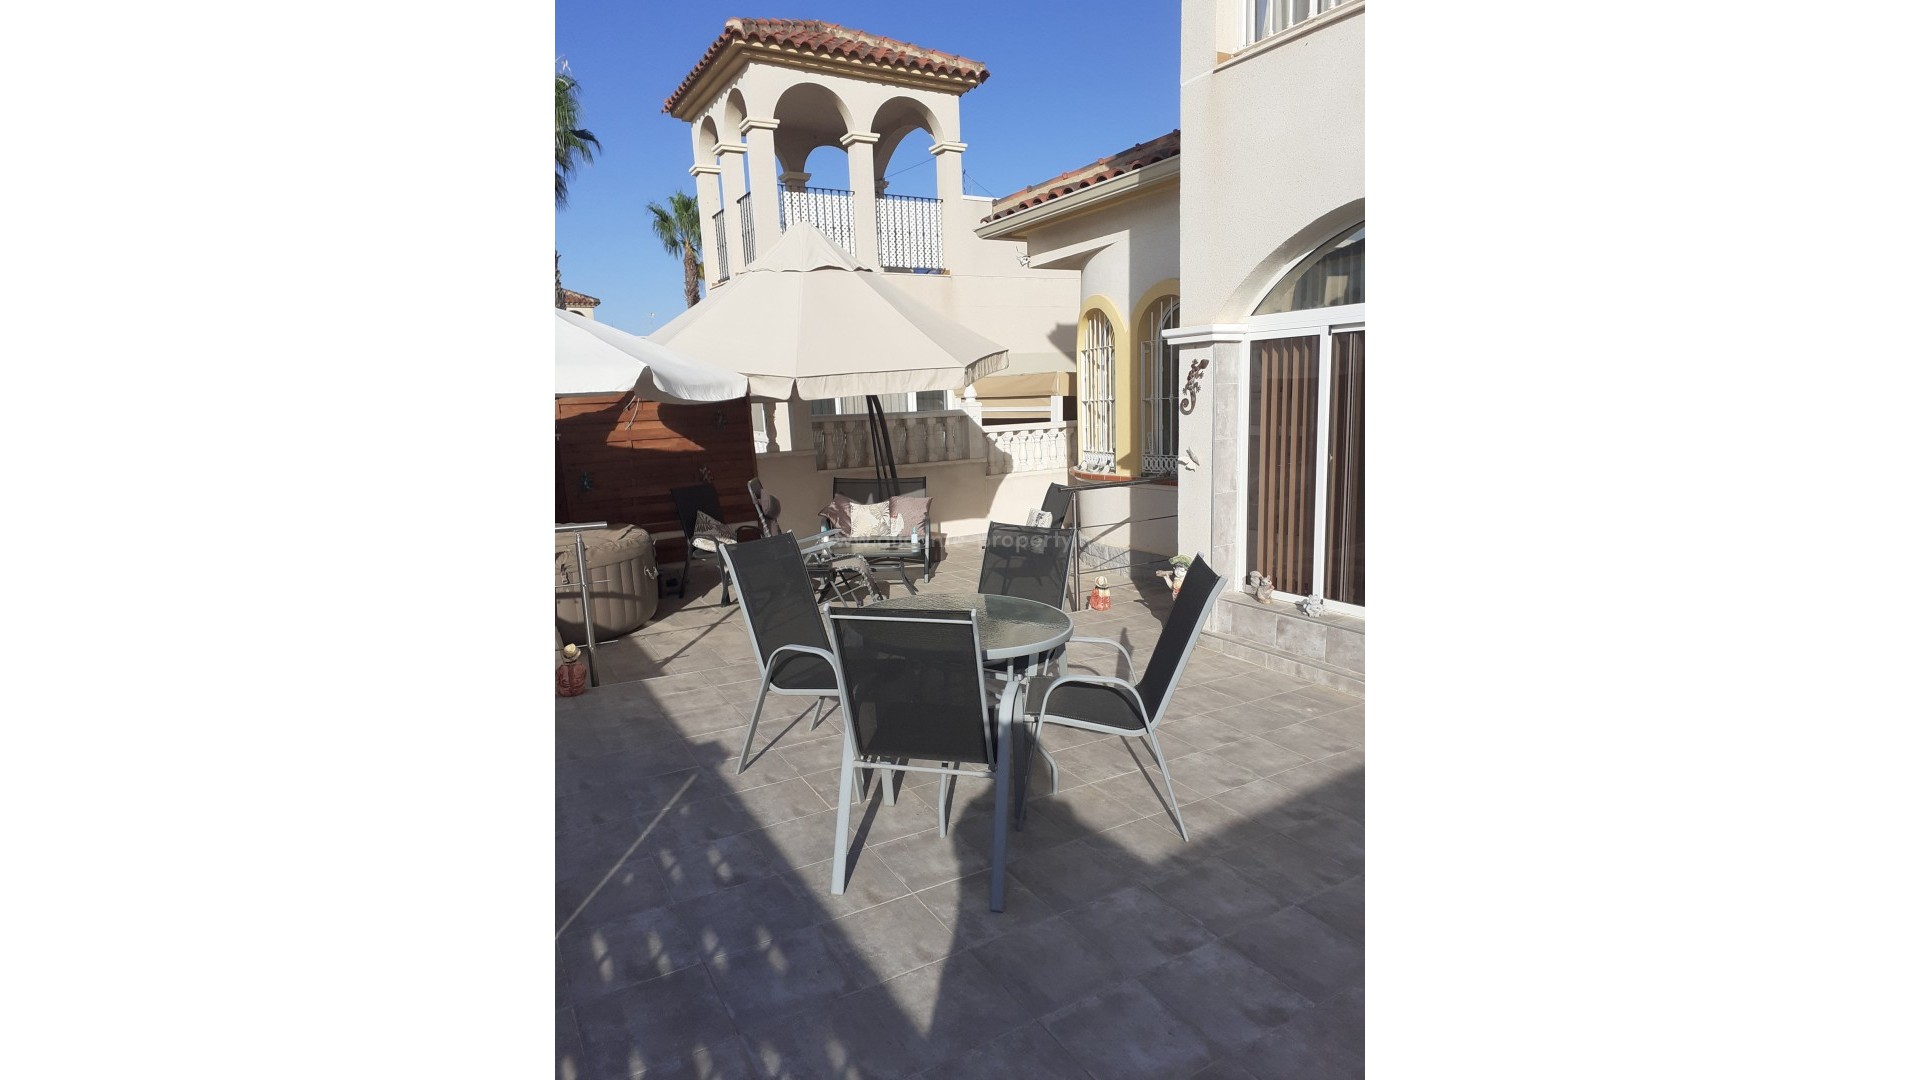 Equity release in Spain, home/bungalow in Rojales, Alicante, 2/3 bedrooms, 1 bathroom, garden and 2 patios, hot tub, solarium, communal pool, 15min to beach